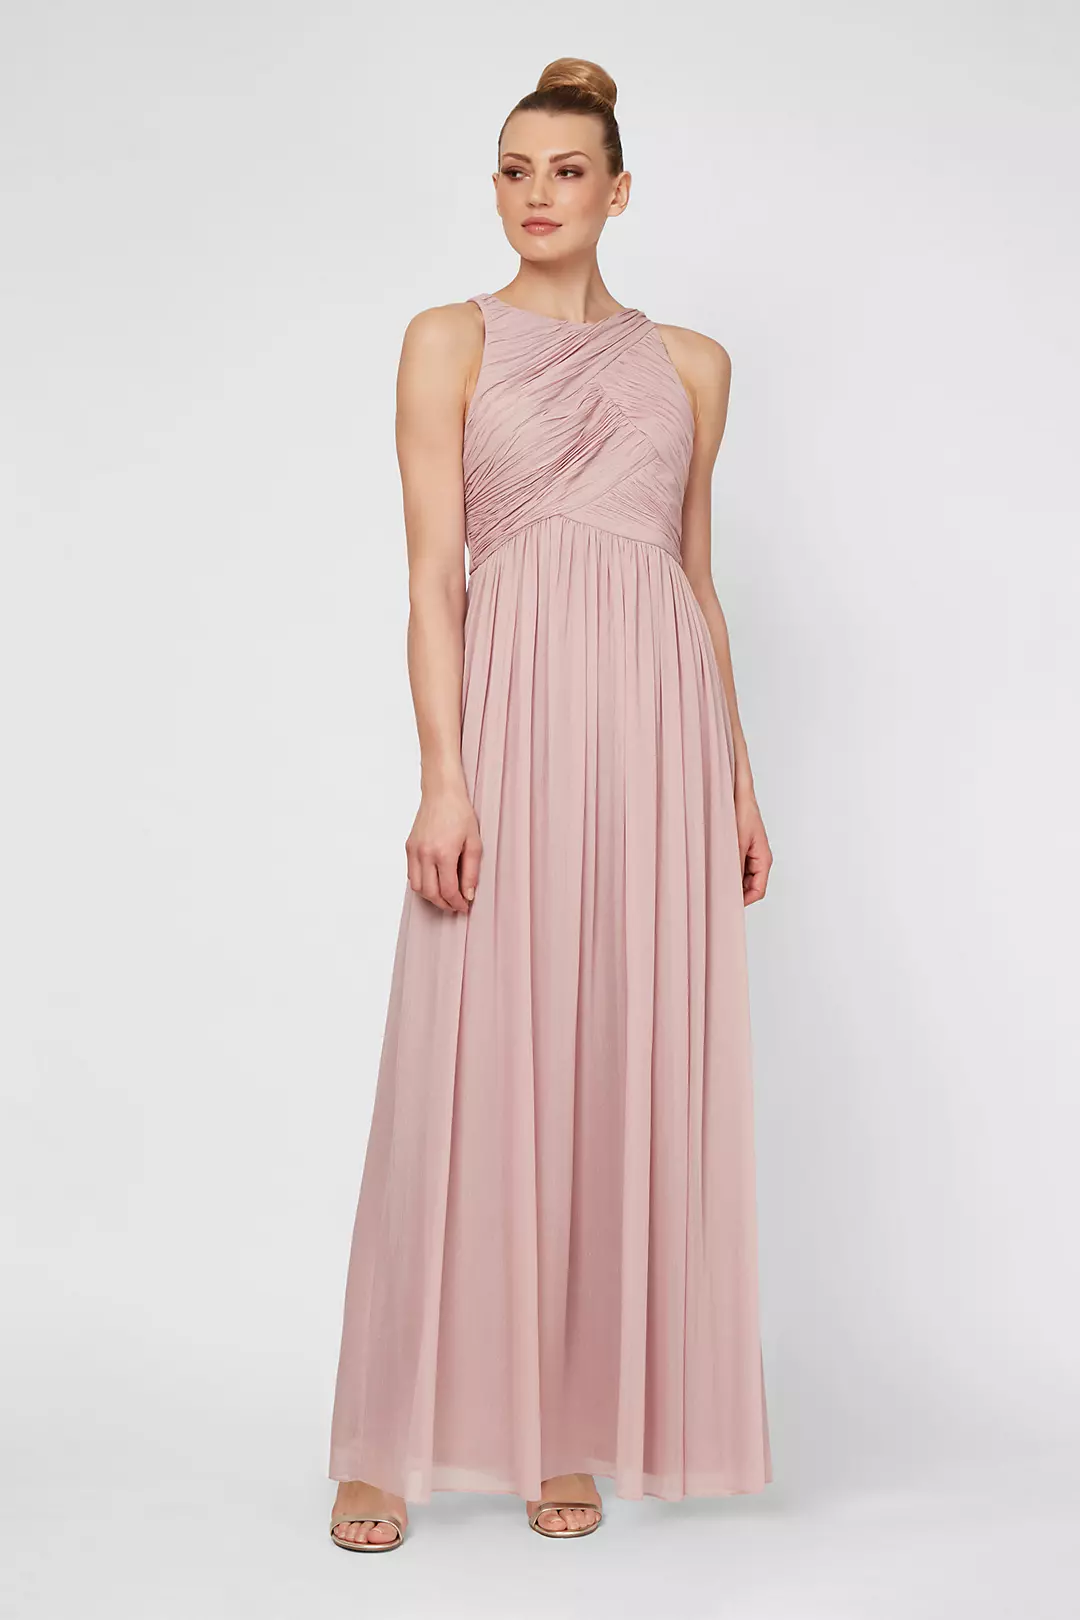 Sleeveless High-Neck Ruched Chiffon Gown Image